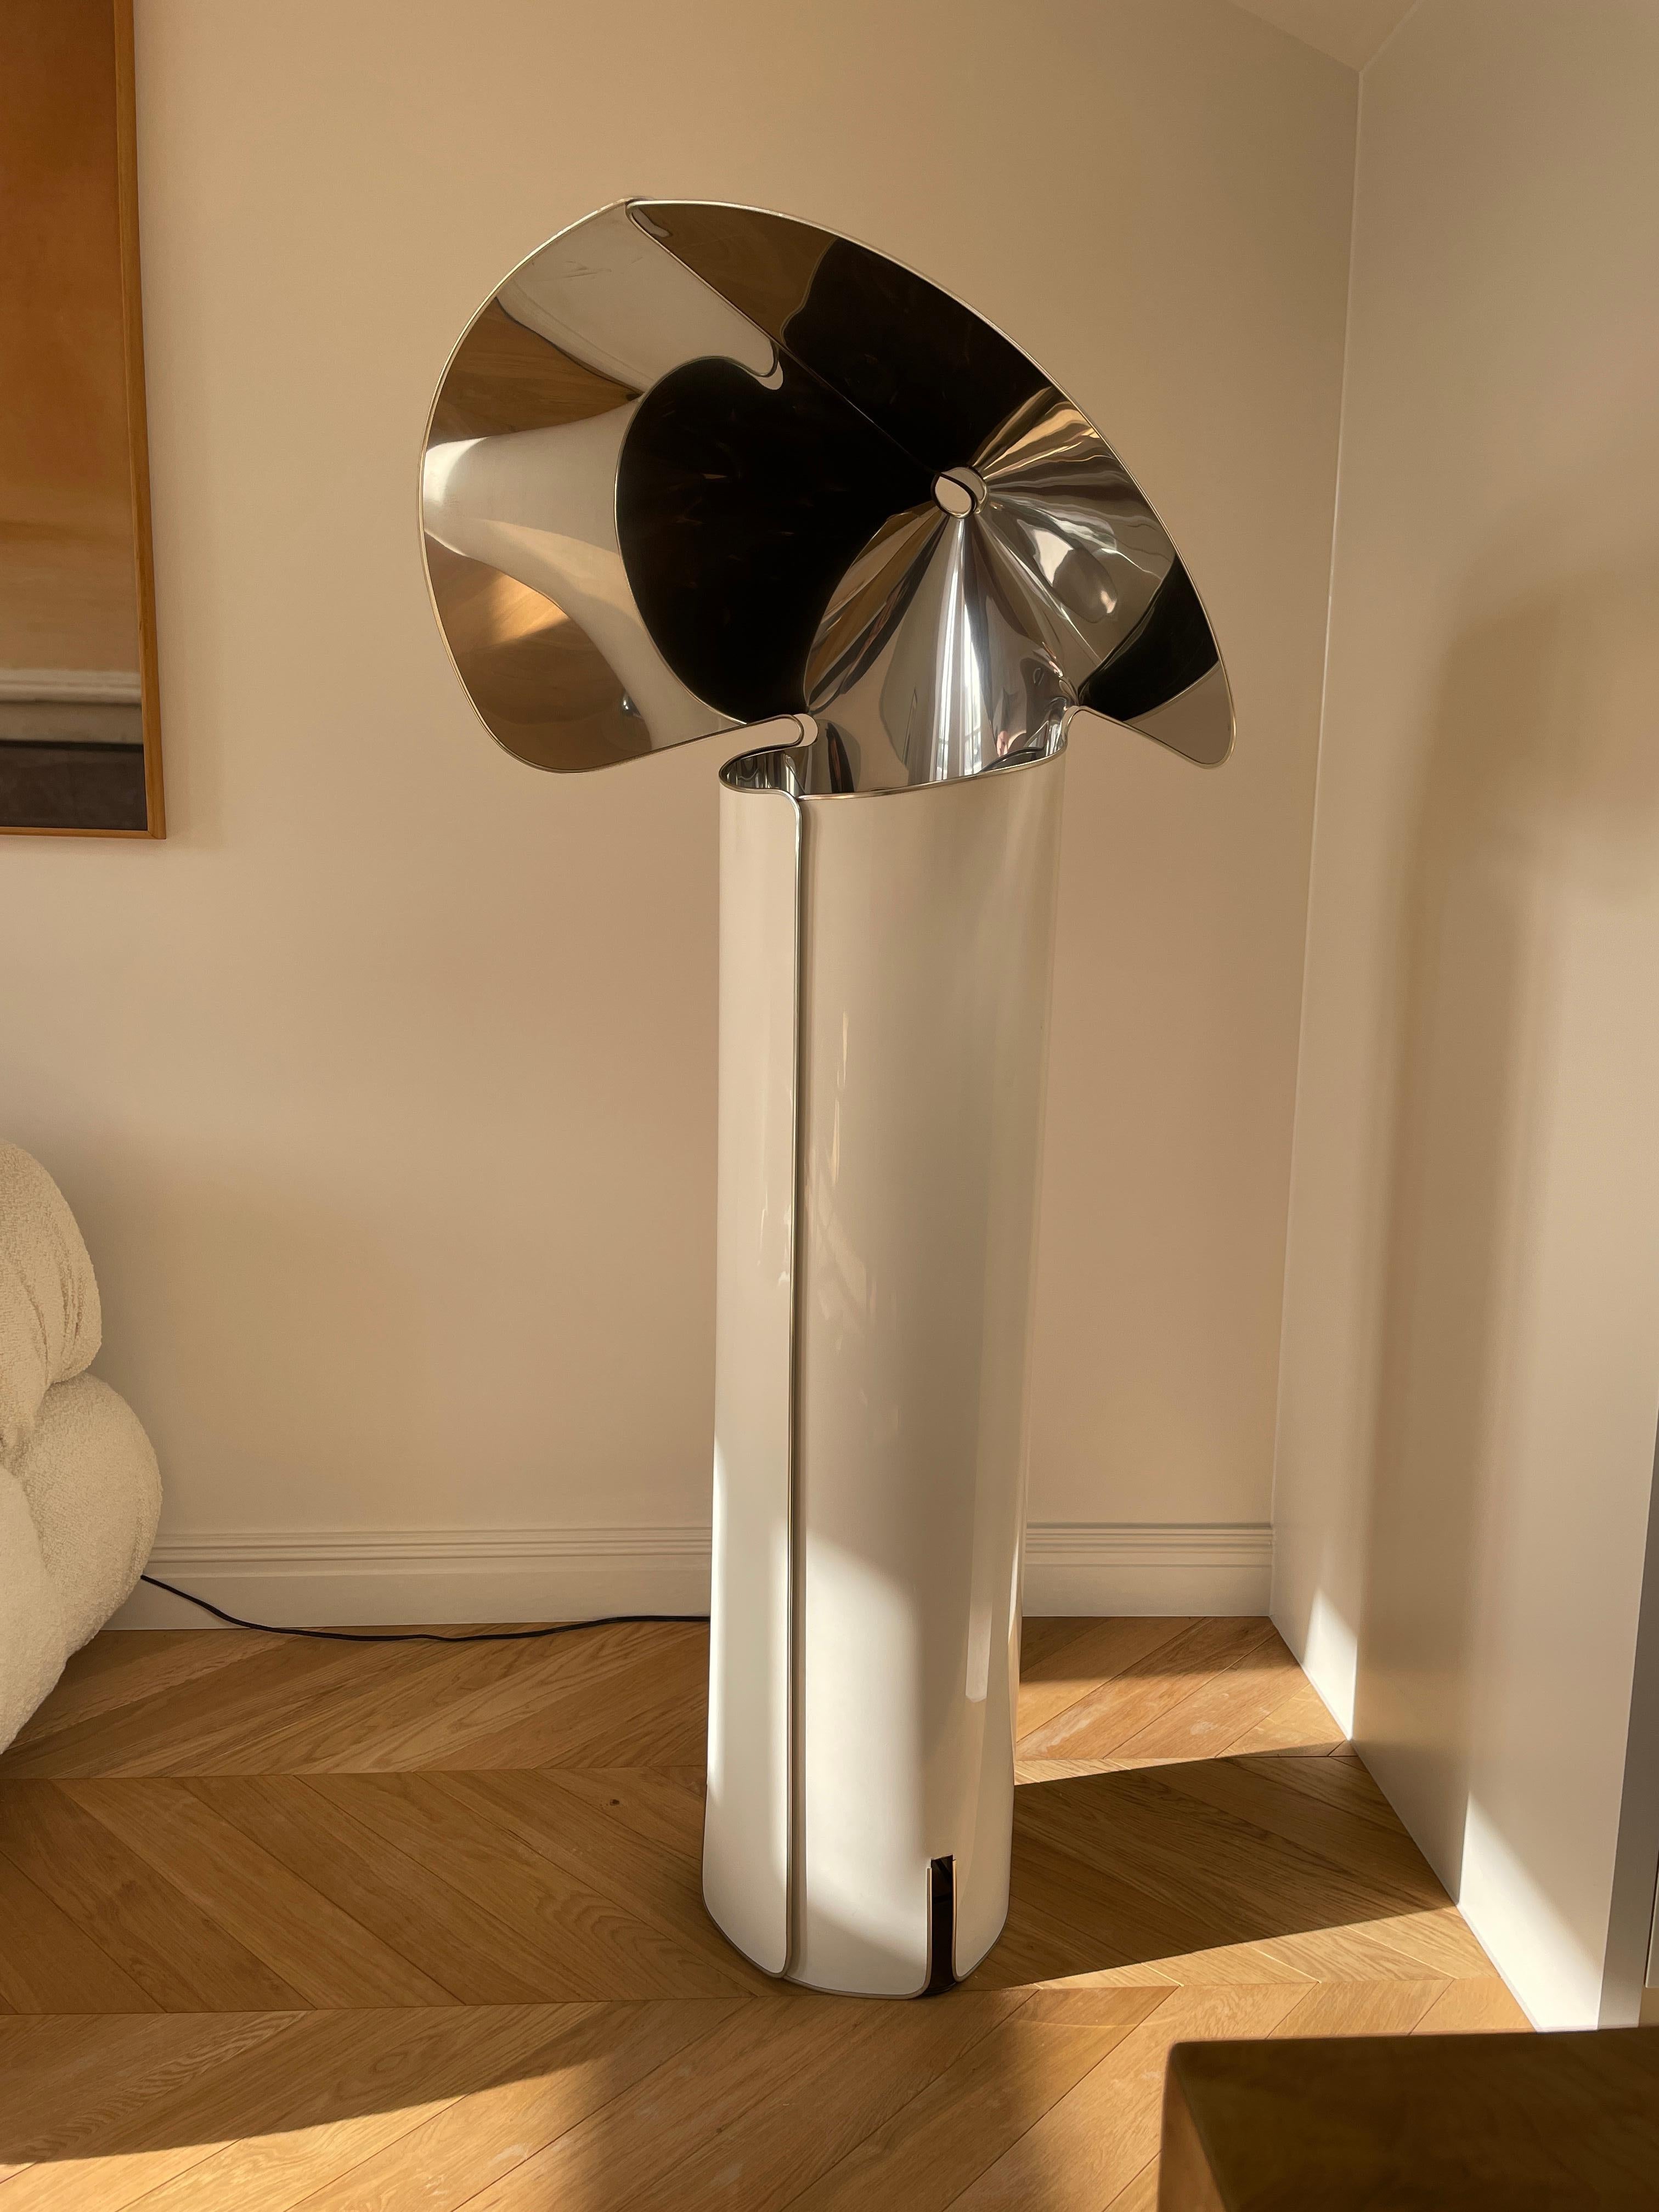 Height: 145cm

Designer: Mario Bellini
 Manufacturer: Flos
Date: 1960s

Materials: Lacquered metal

Description: This flatpackable design was made by Flos in 1969 and immediately became a design classic. Based loosely on a nun’s Habit, the lamp